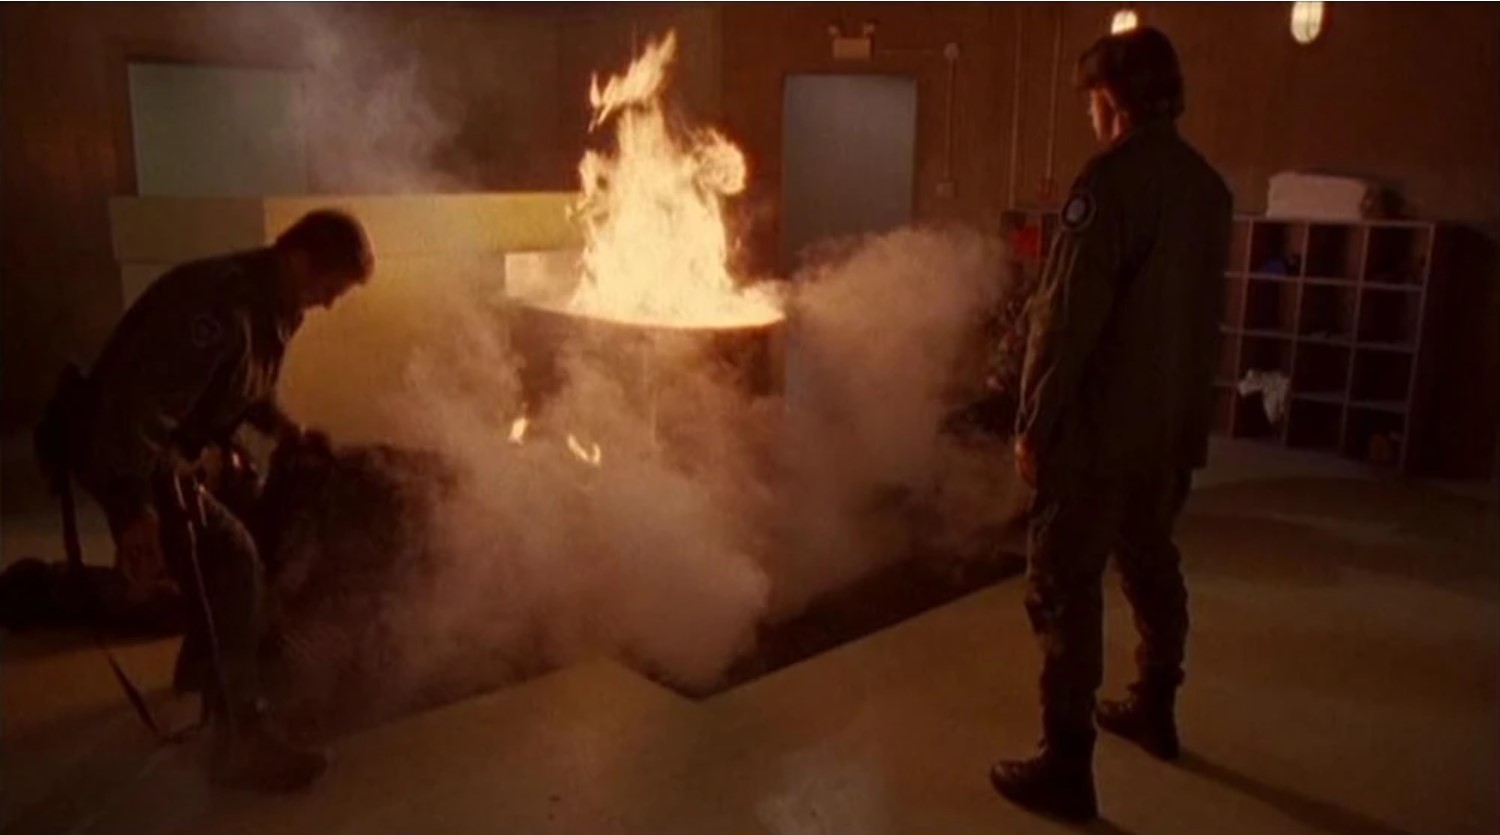 Still from the episode in question. Daniel watches as the human/alien hybrid breeding tank burns.